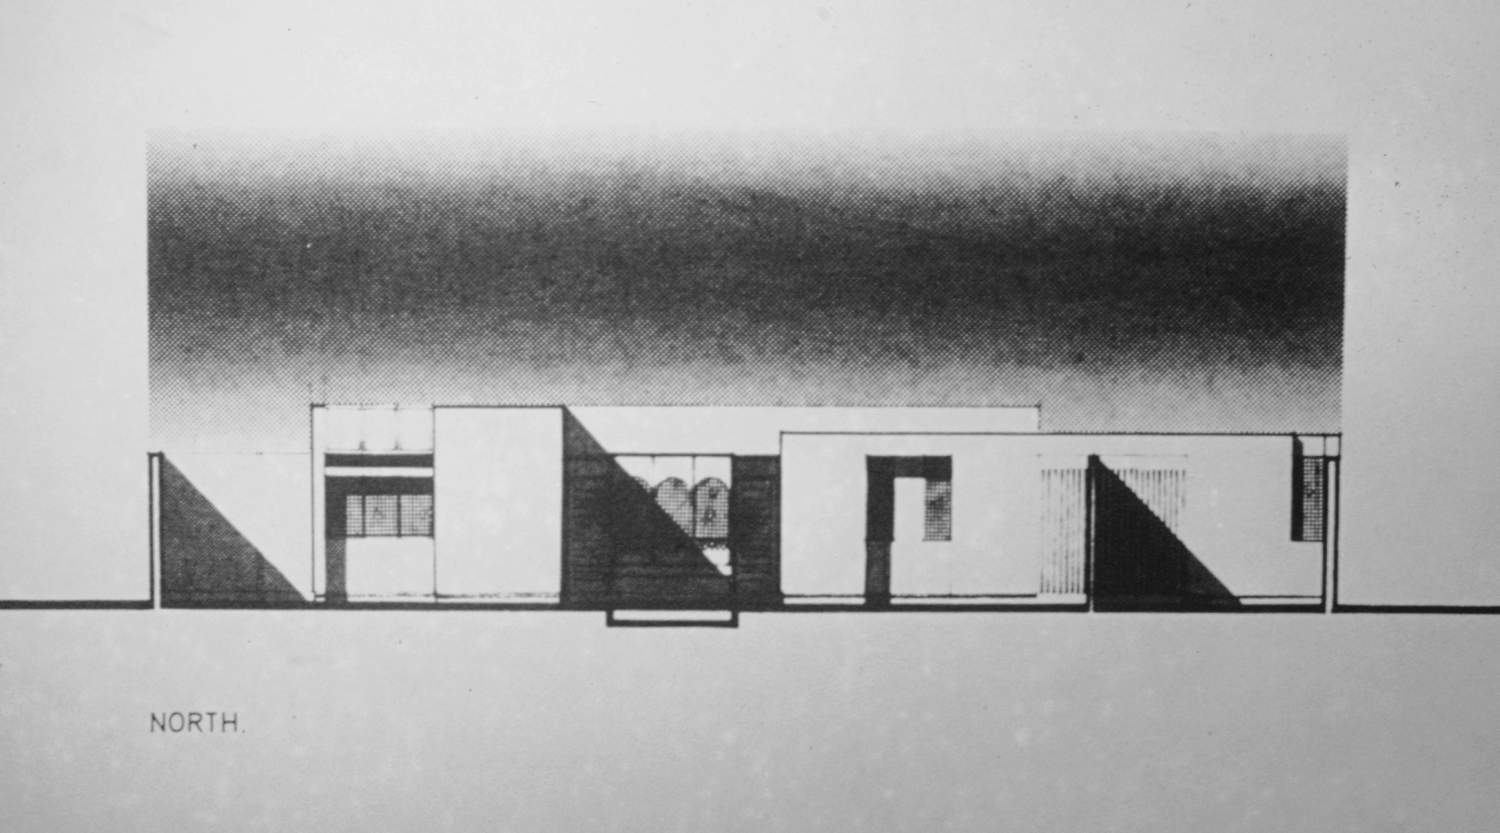 <p>North elevation of one of types of house designed for the complex</p>